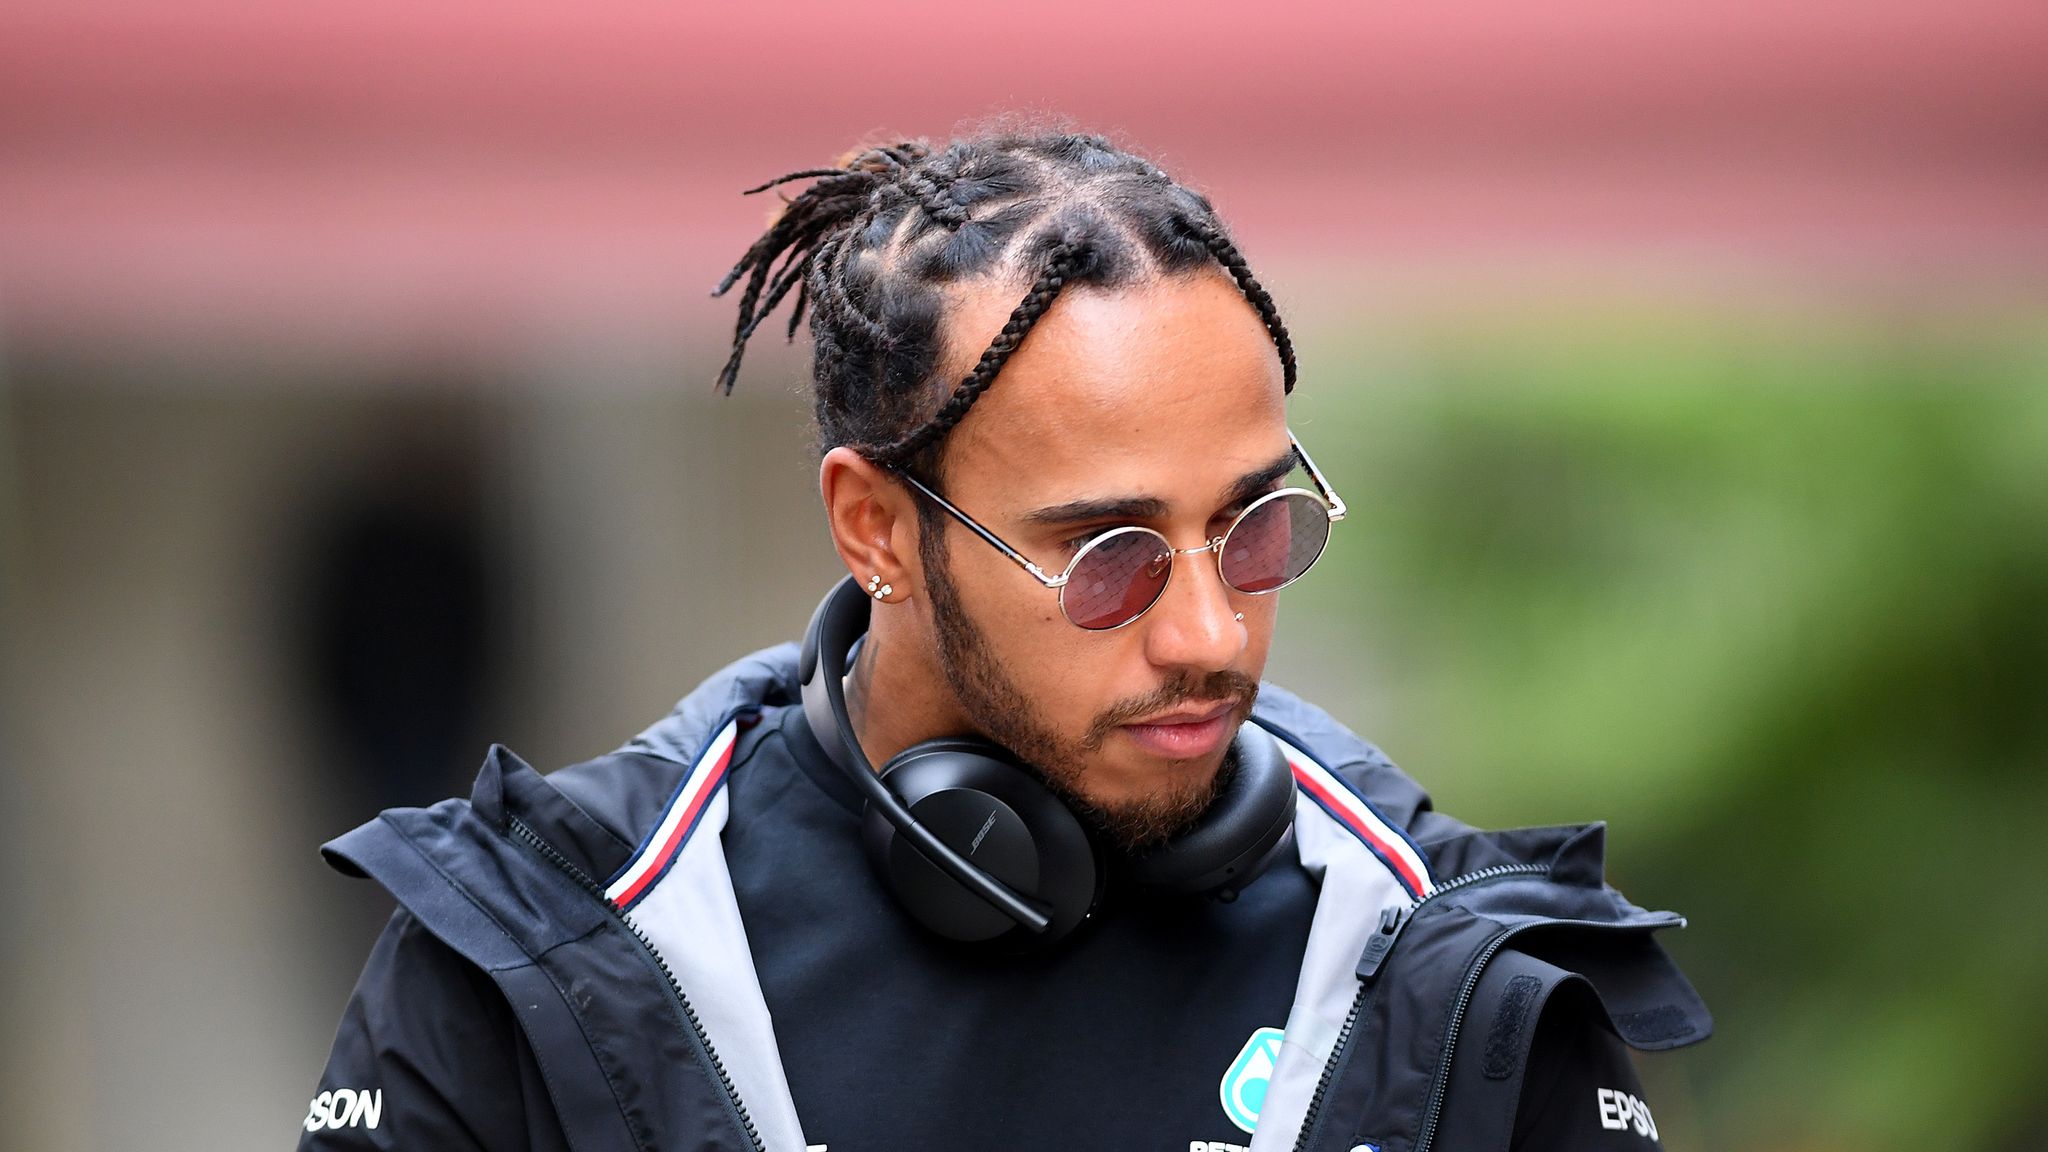 Lewis Hamilton tests positive for Covid-19 and will be missing Sakhir GP